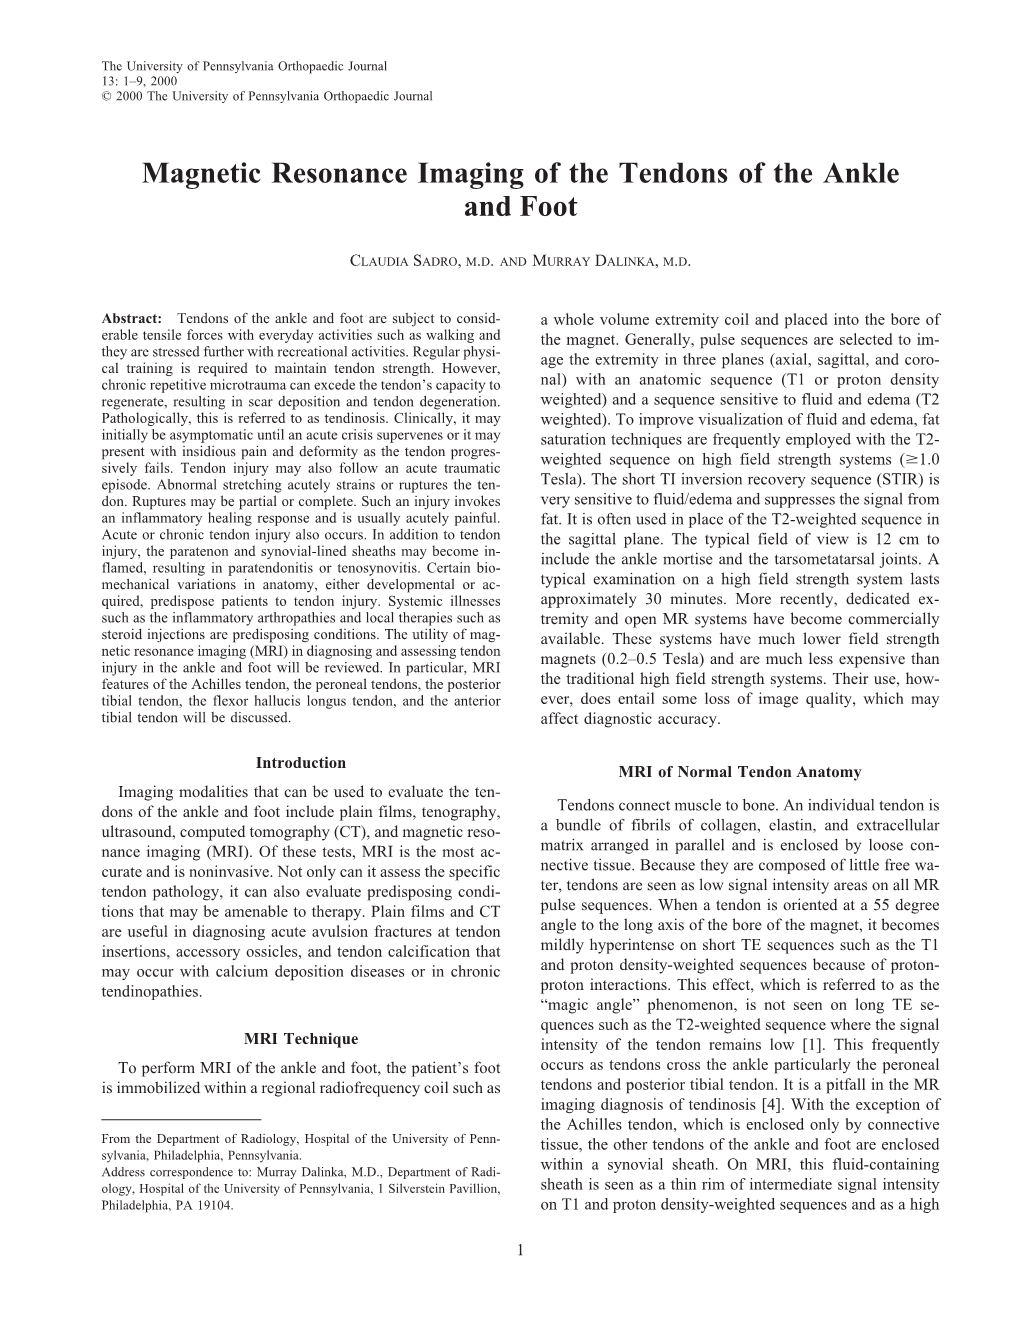 Magnetic Resonance Imaging of the Tendons of the Ankle and Foot